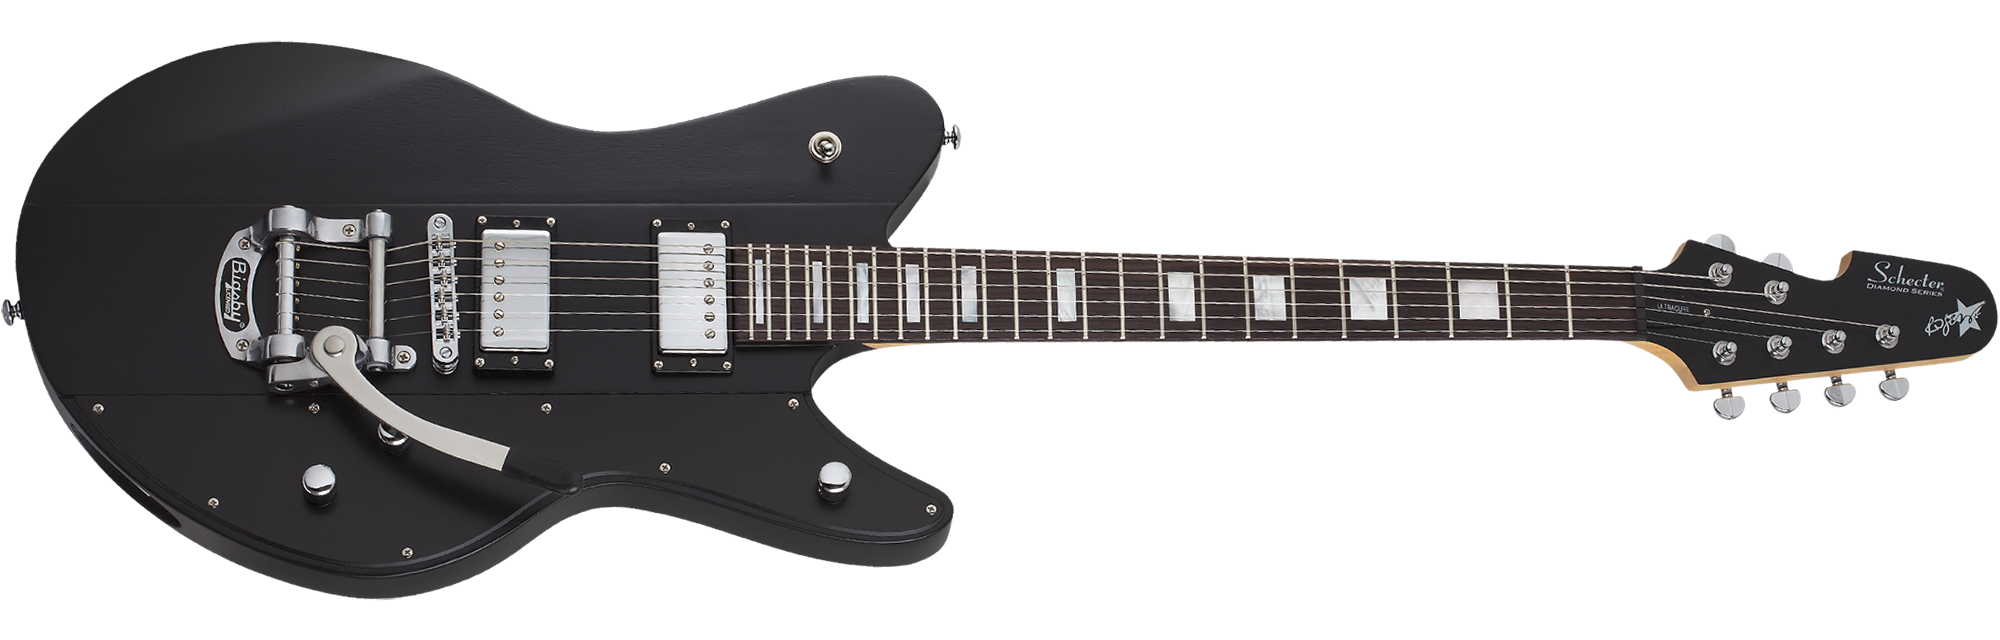 Schecter Robert Smith UltraCure Black Pearl SKU 285 - The Guitar World